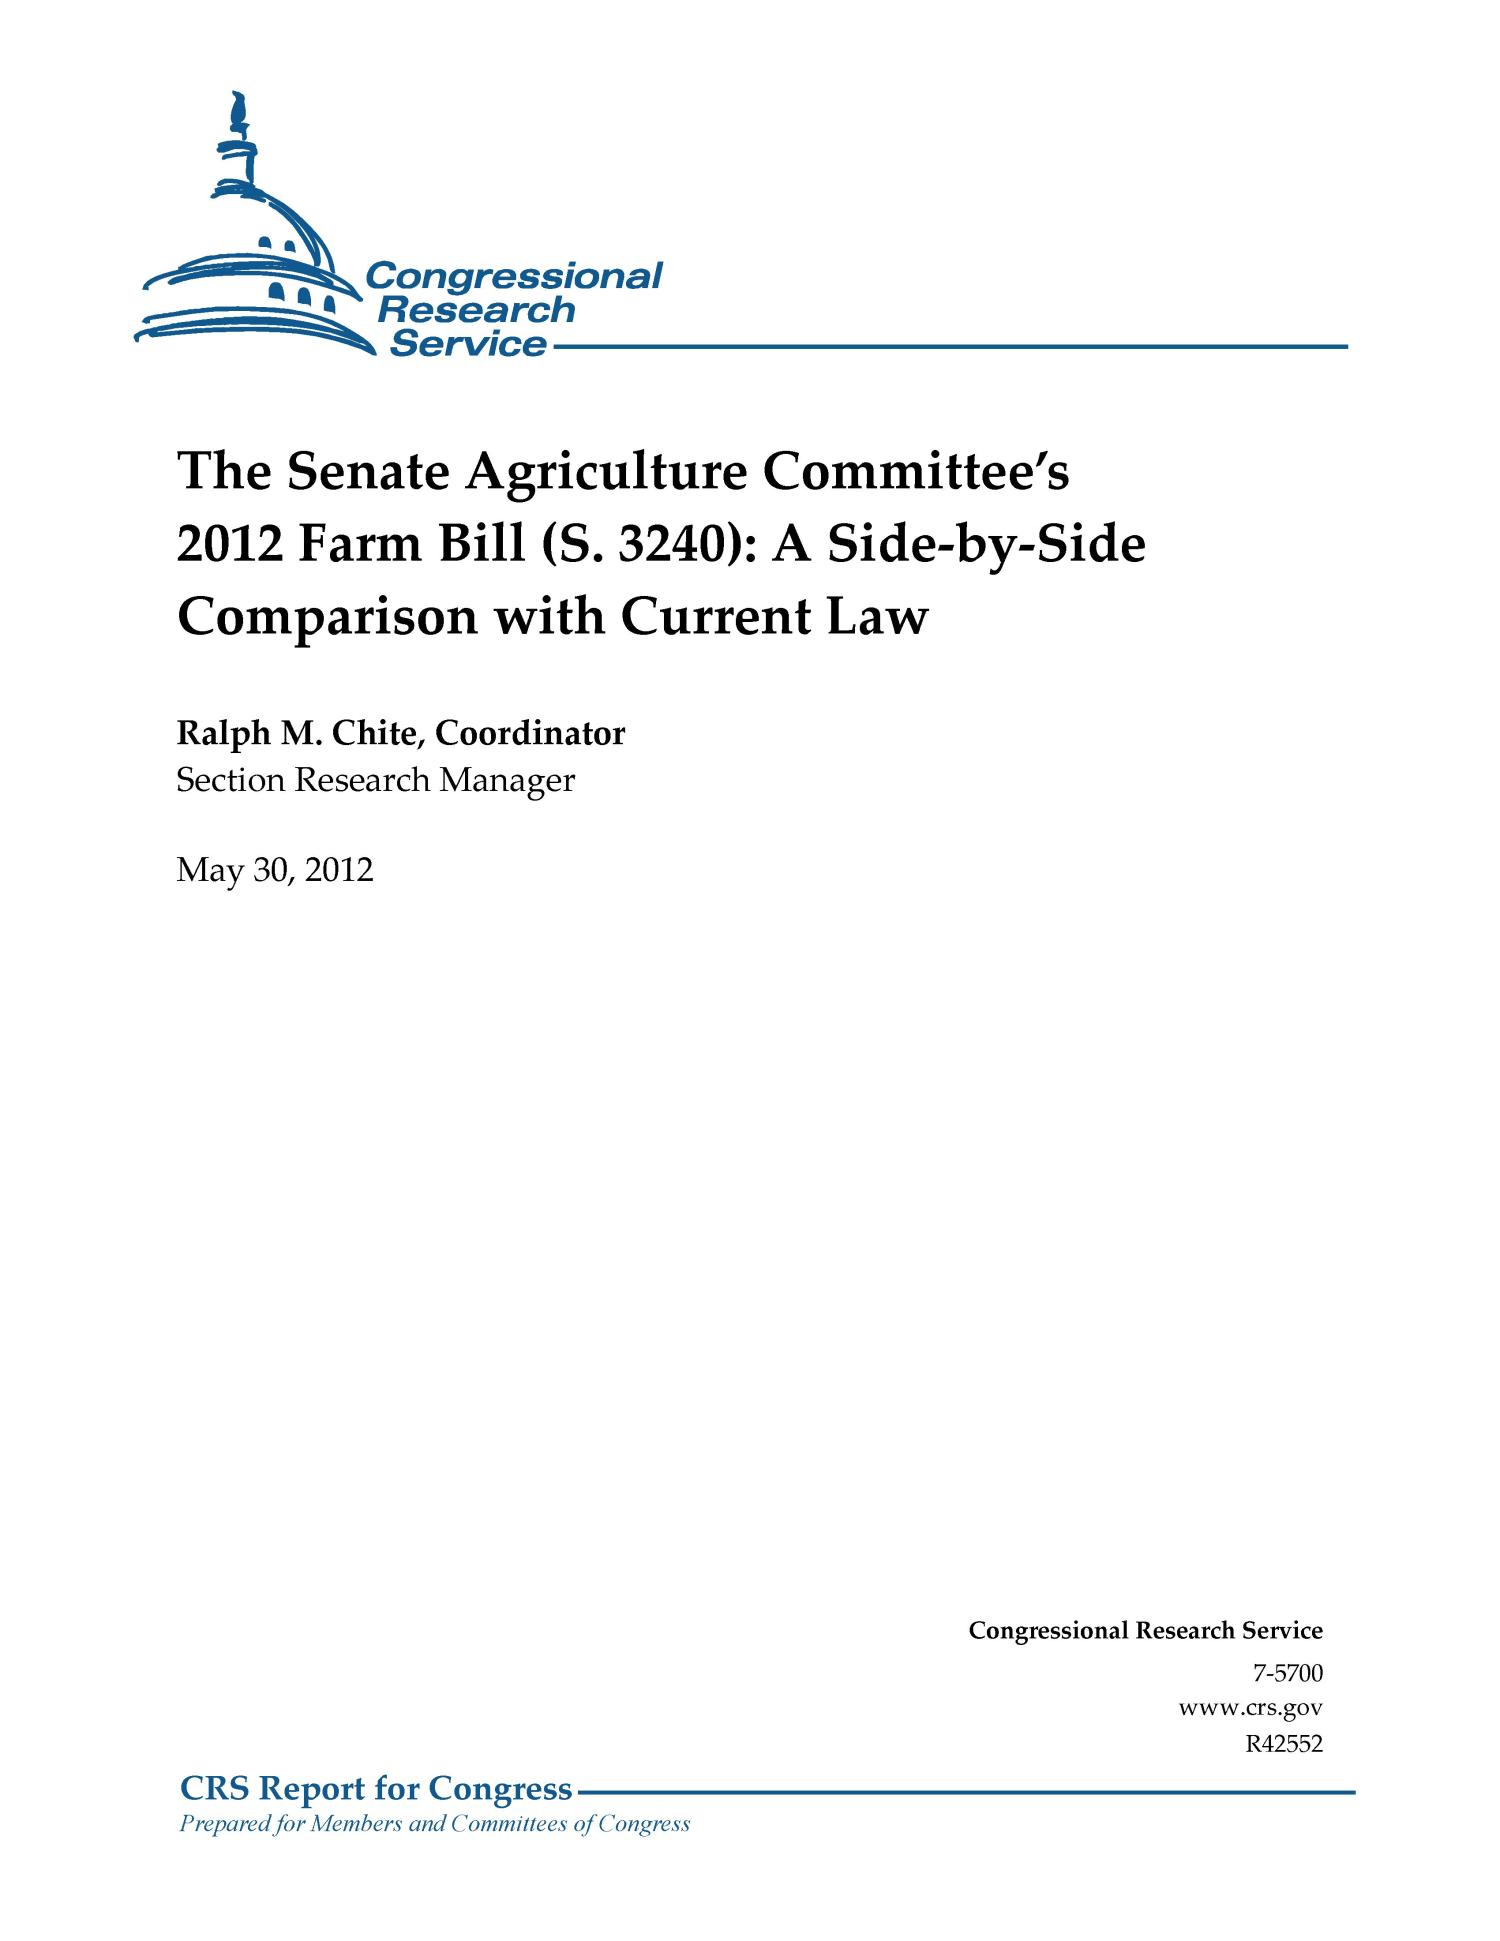 The Senate Agriculture Committee’s 2012 Farm Bill (S. 3240): A Side-by-Side Comparison with Current Law
                                                
                                                    [Sequence #]: 1 of 78
                                                